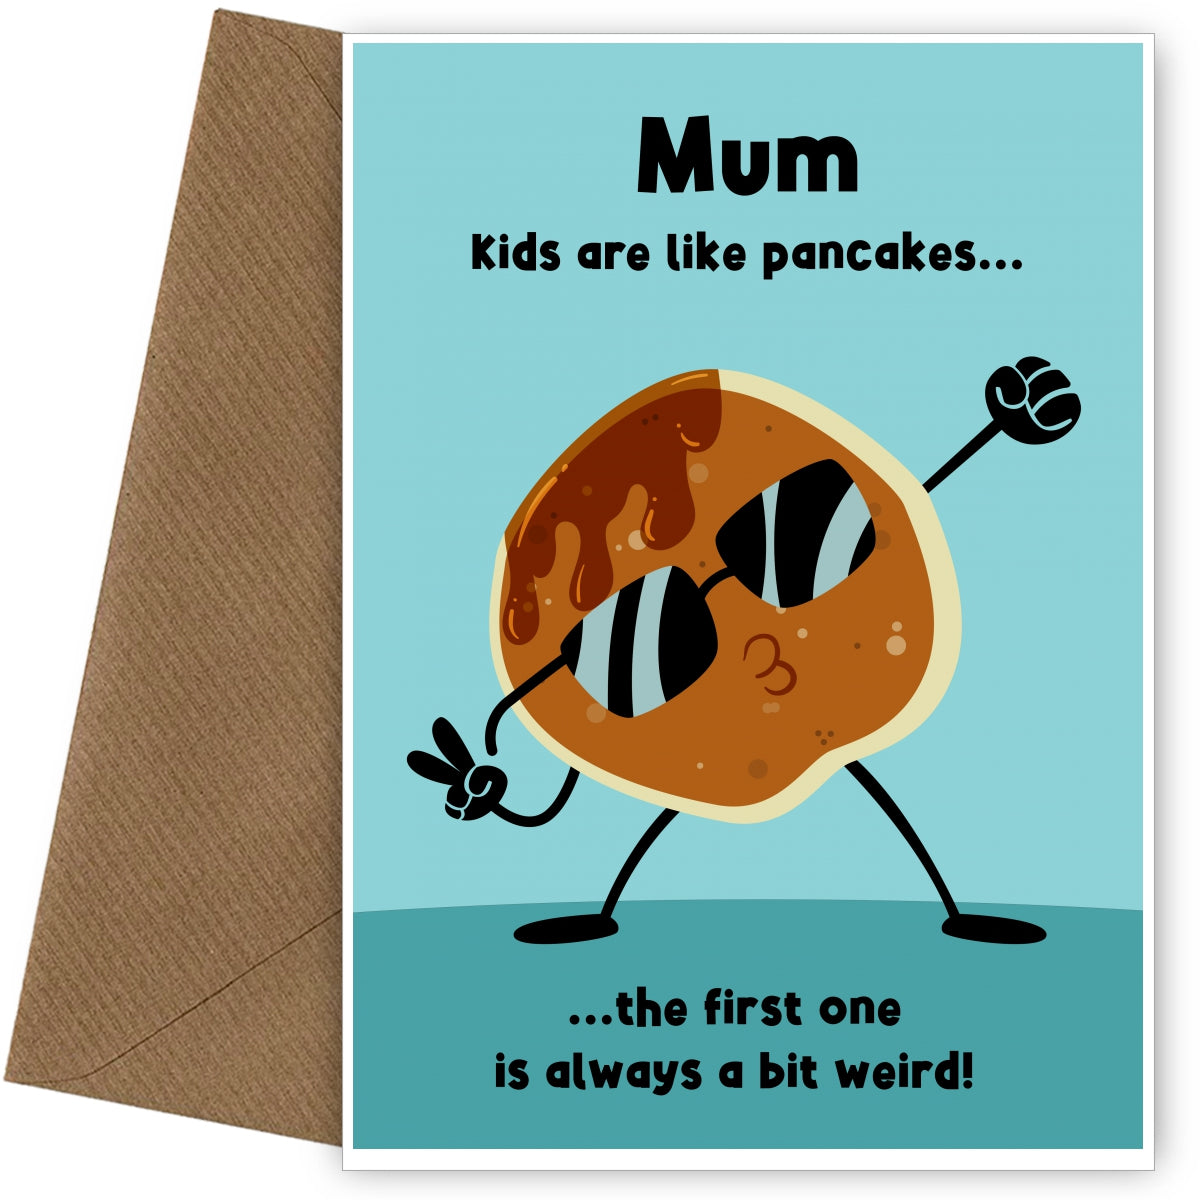 Humorous Mother's Day Card for Mum | Kids Like Pancakes - First One's a Bit Weird!